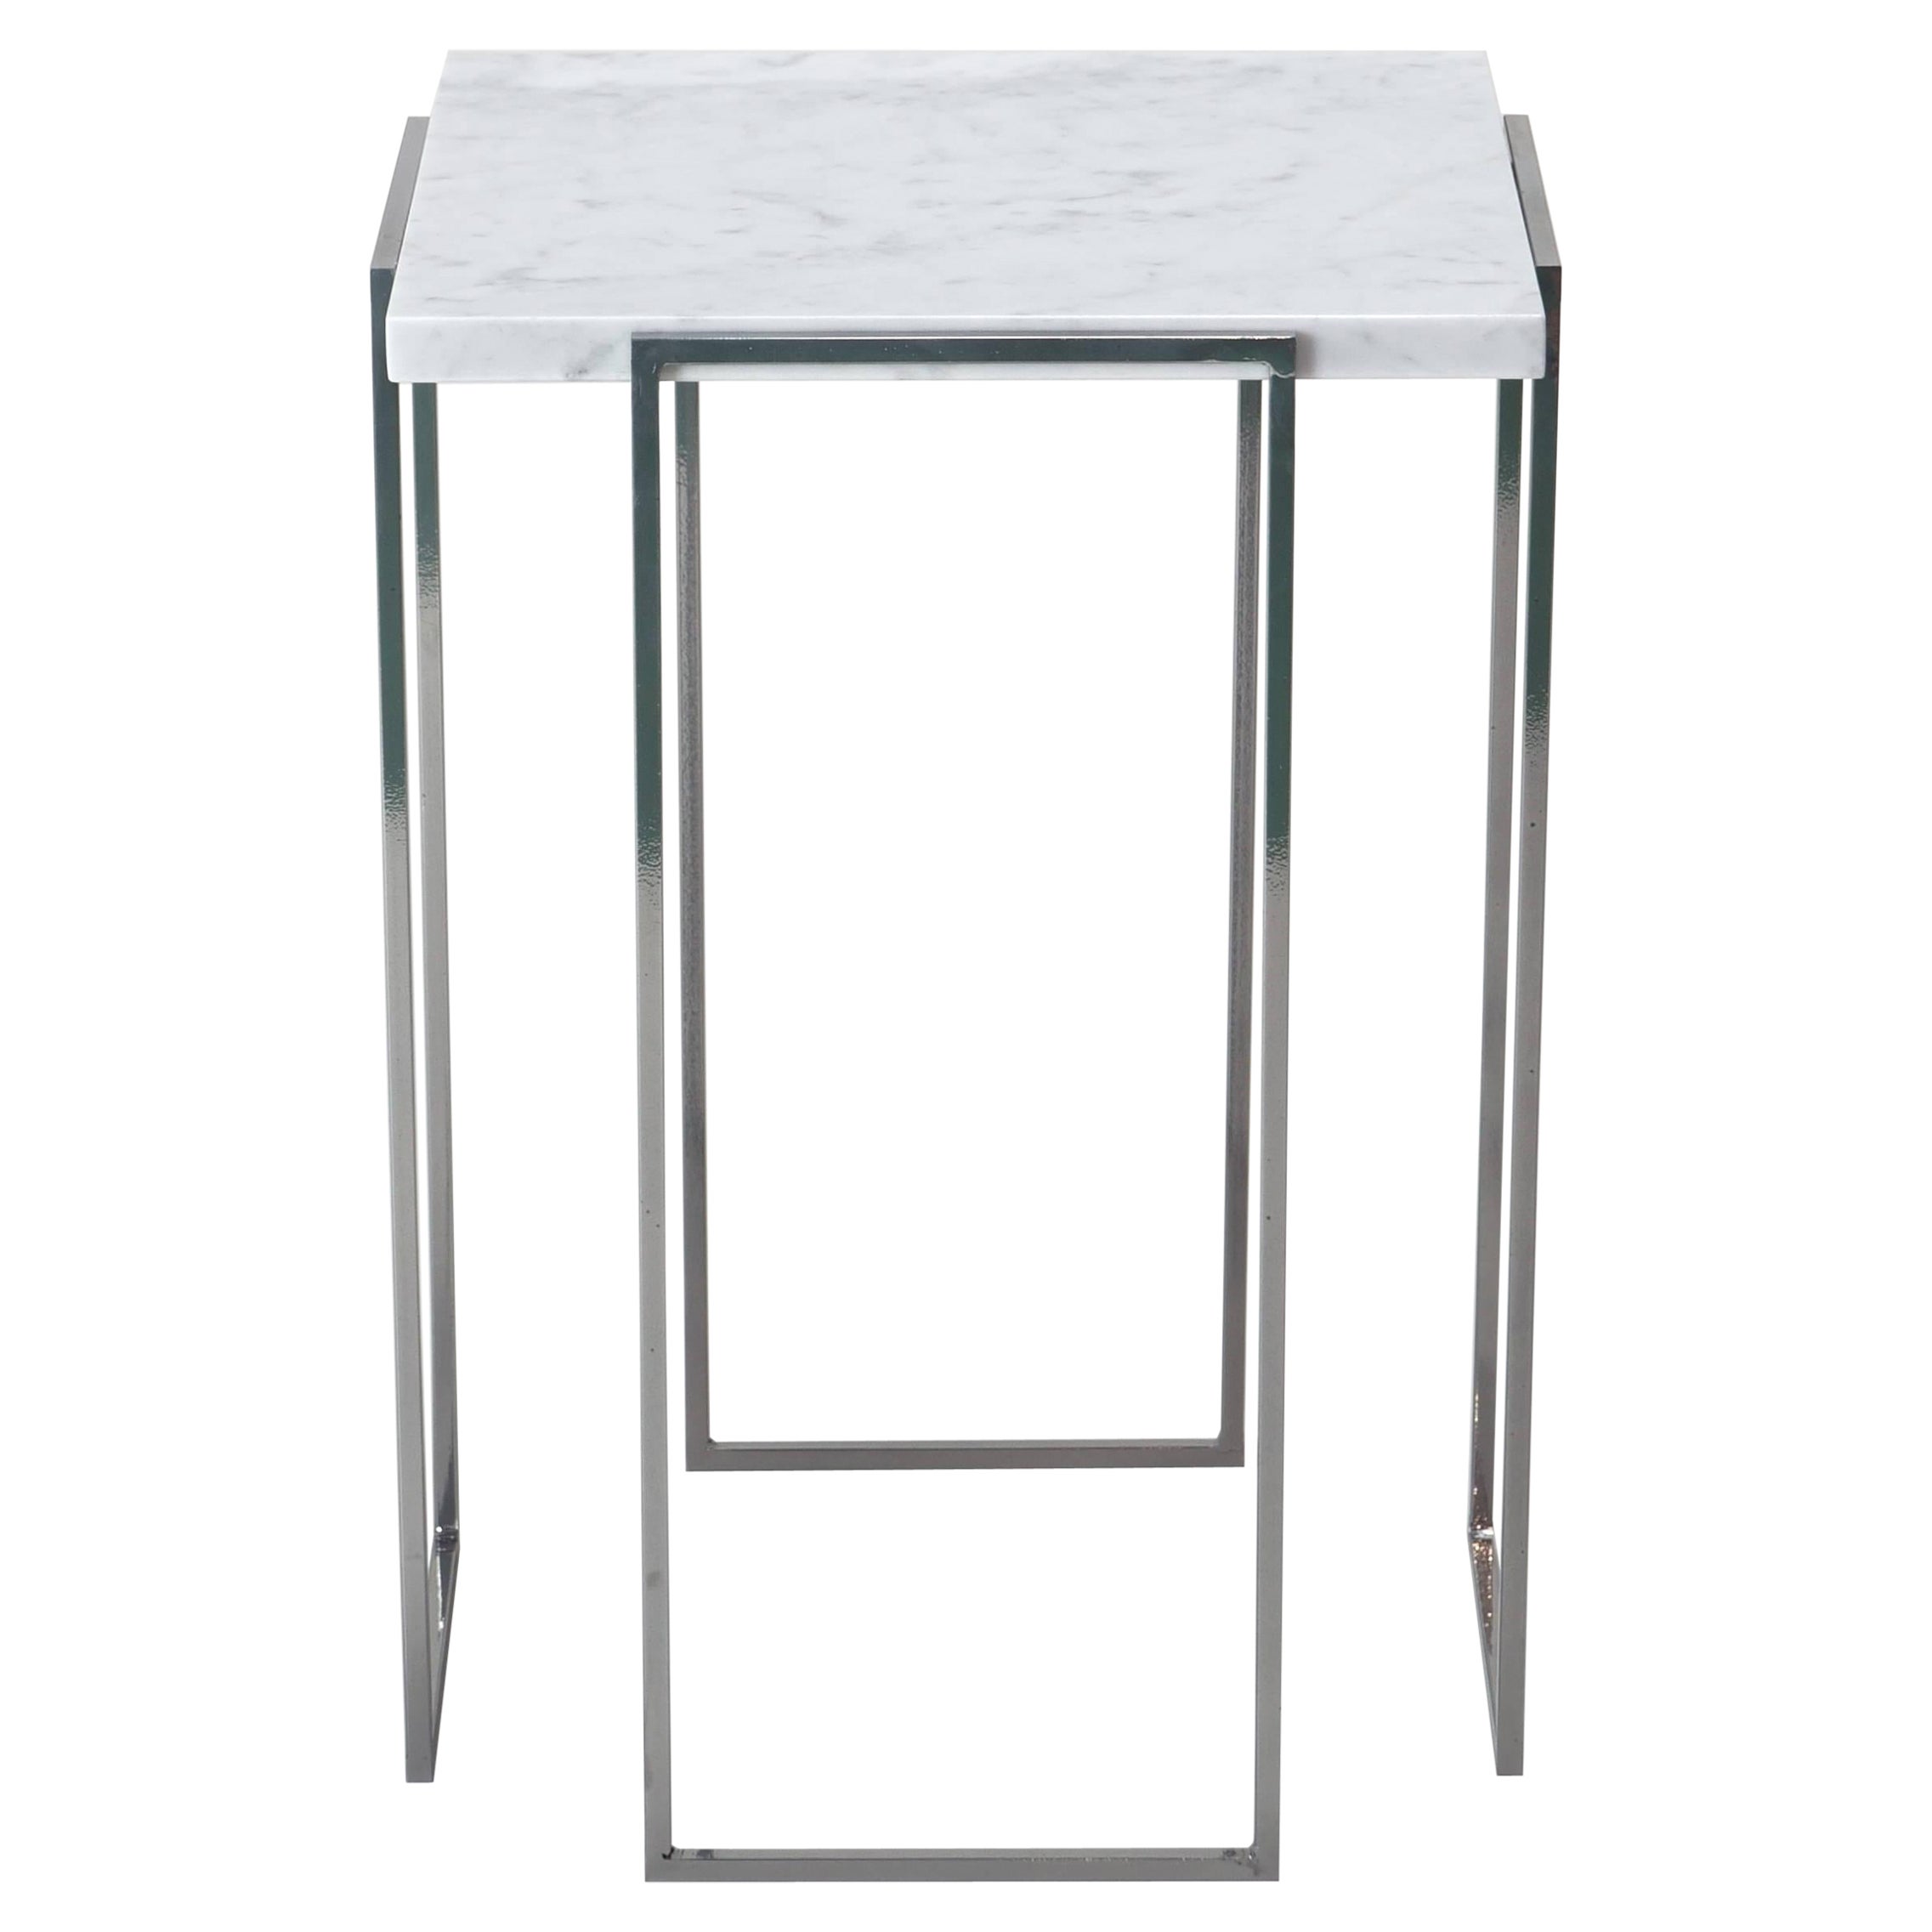 Kaus Cromo, Carrara Marble Side Table By DFdesignlab Handmade in Italy For Sale